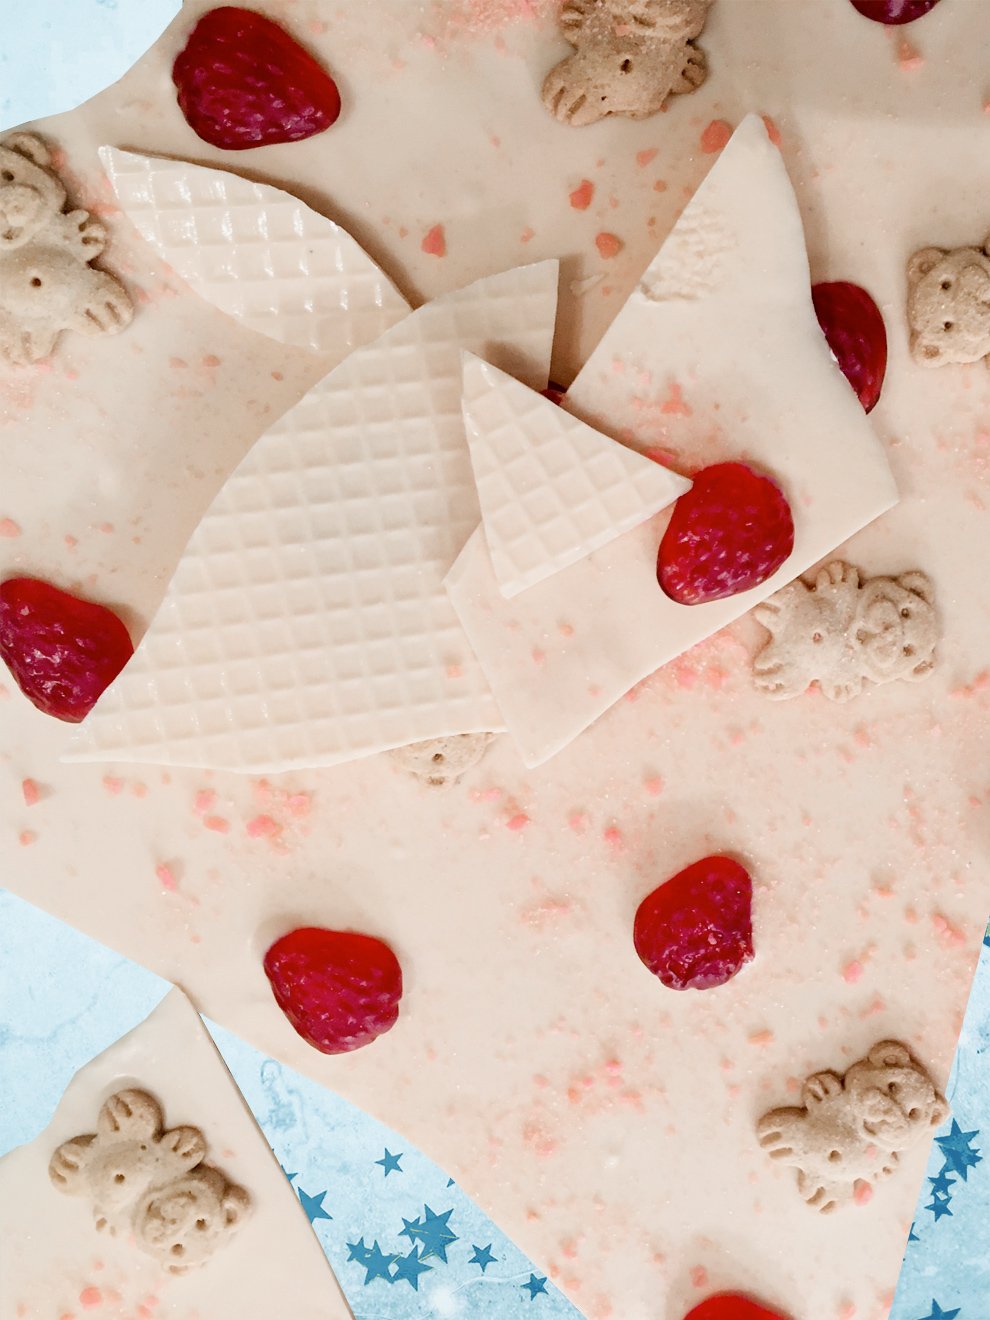 QUEST XO Berry Cheesecake Bark: Pieces of white chocolate with teddy bears on it placed on top of white chocolate.